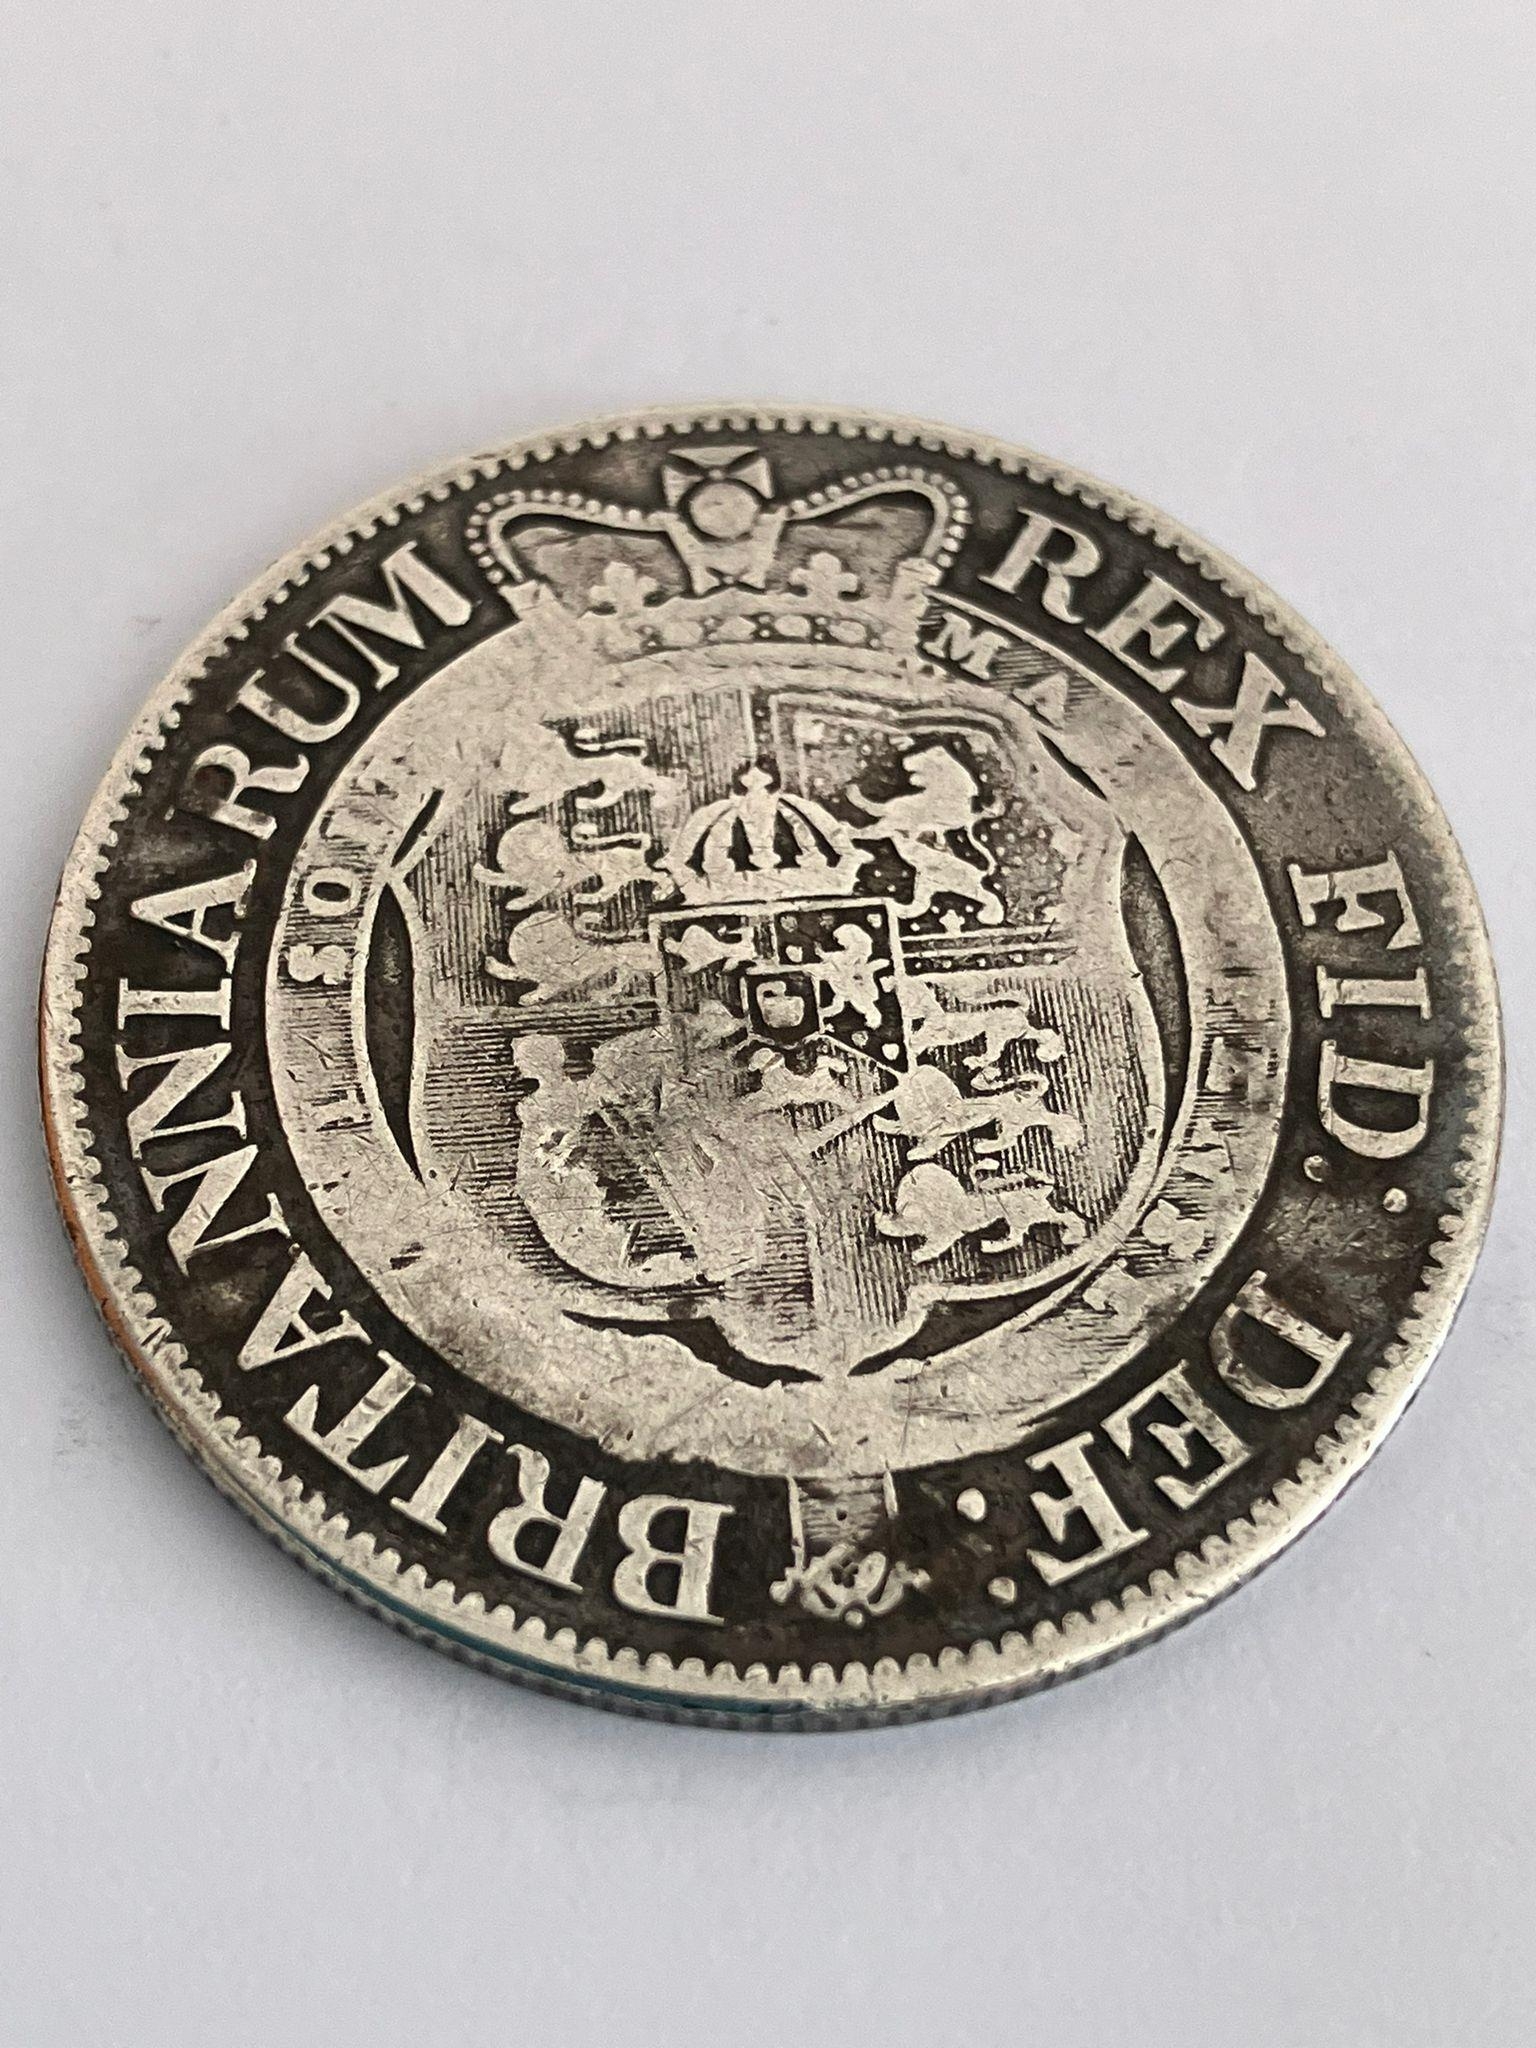 1817 GEORGE III SILVER HALF CROWN. Condition Fine almost Very Fine. - Image 2 of 3